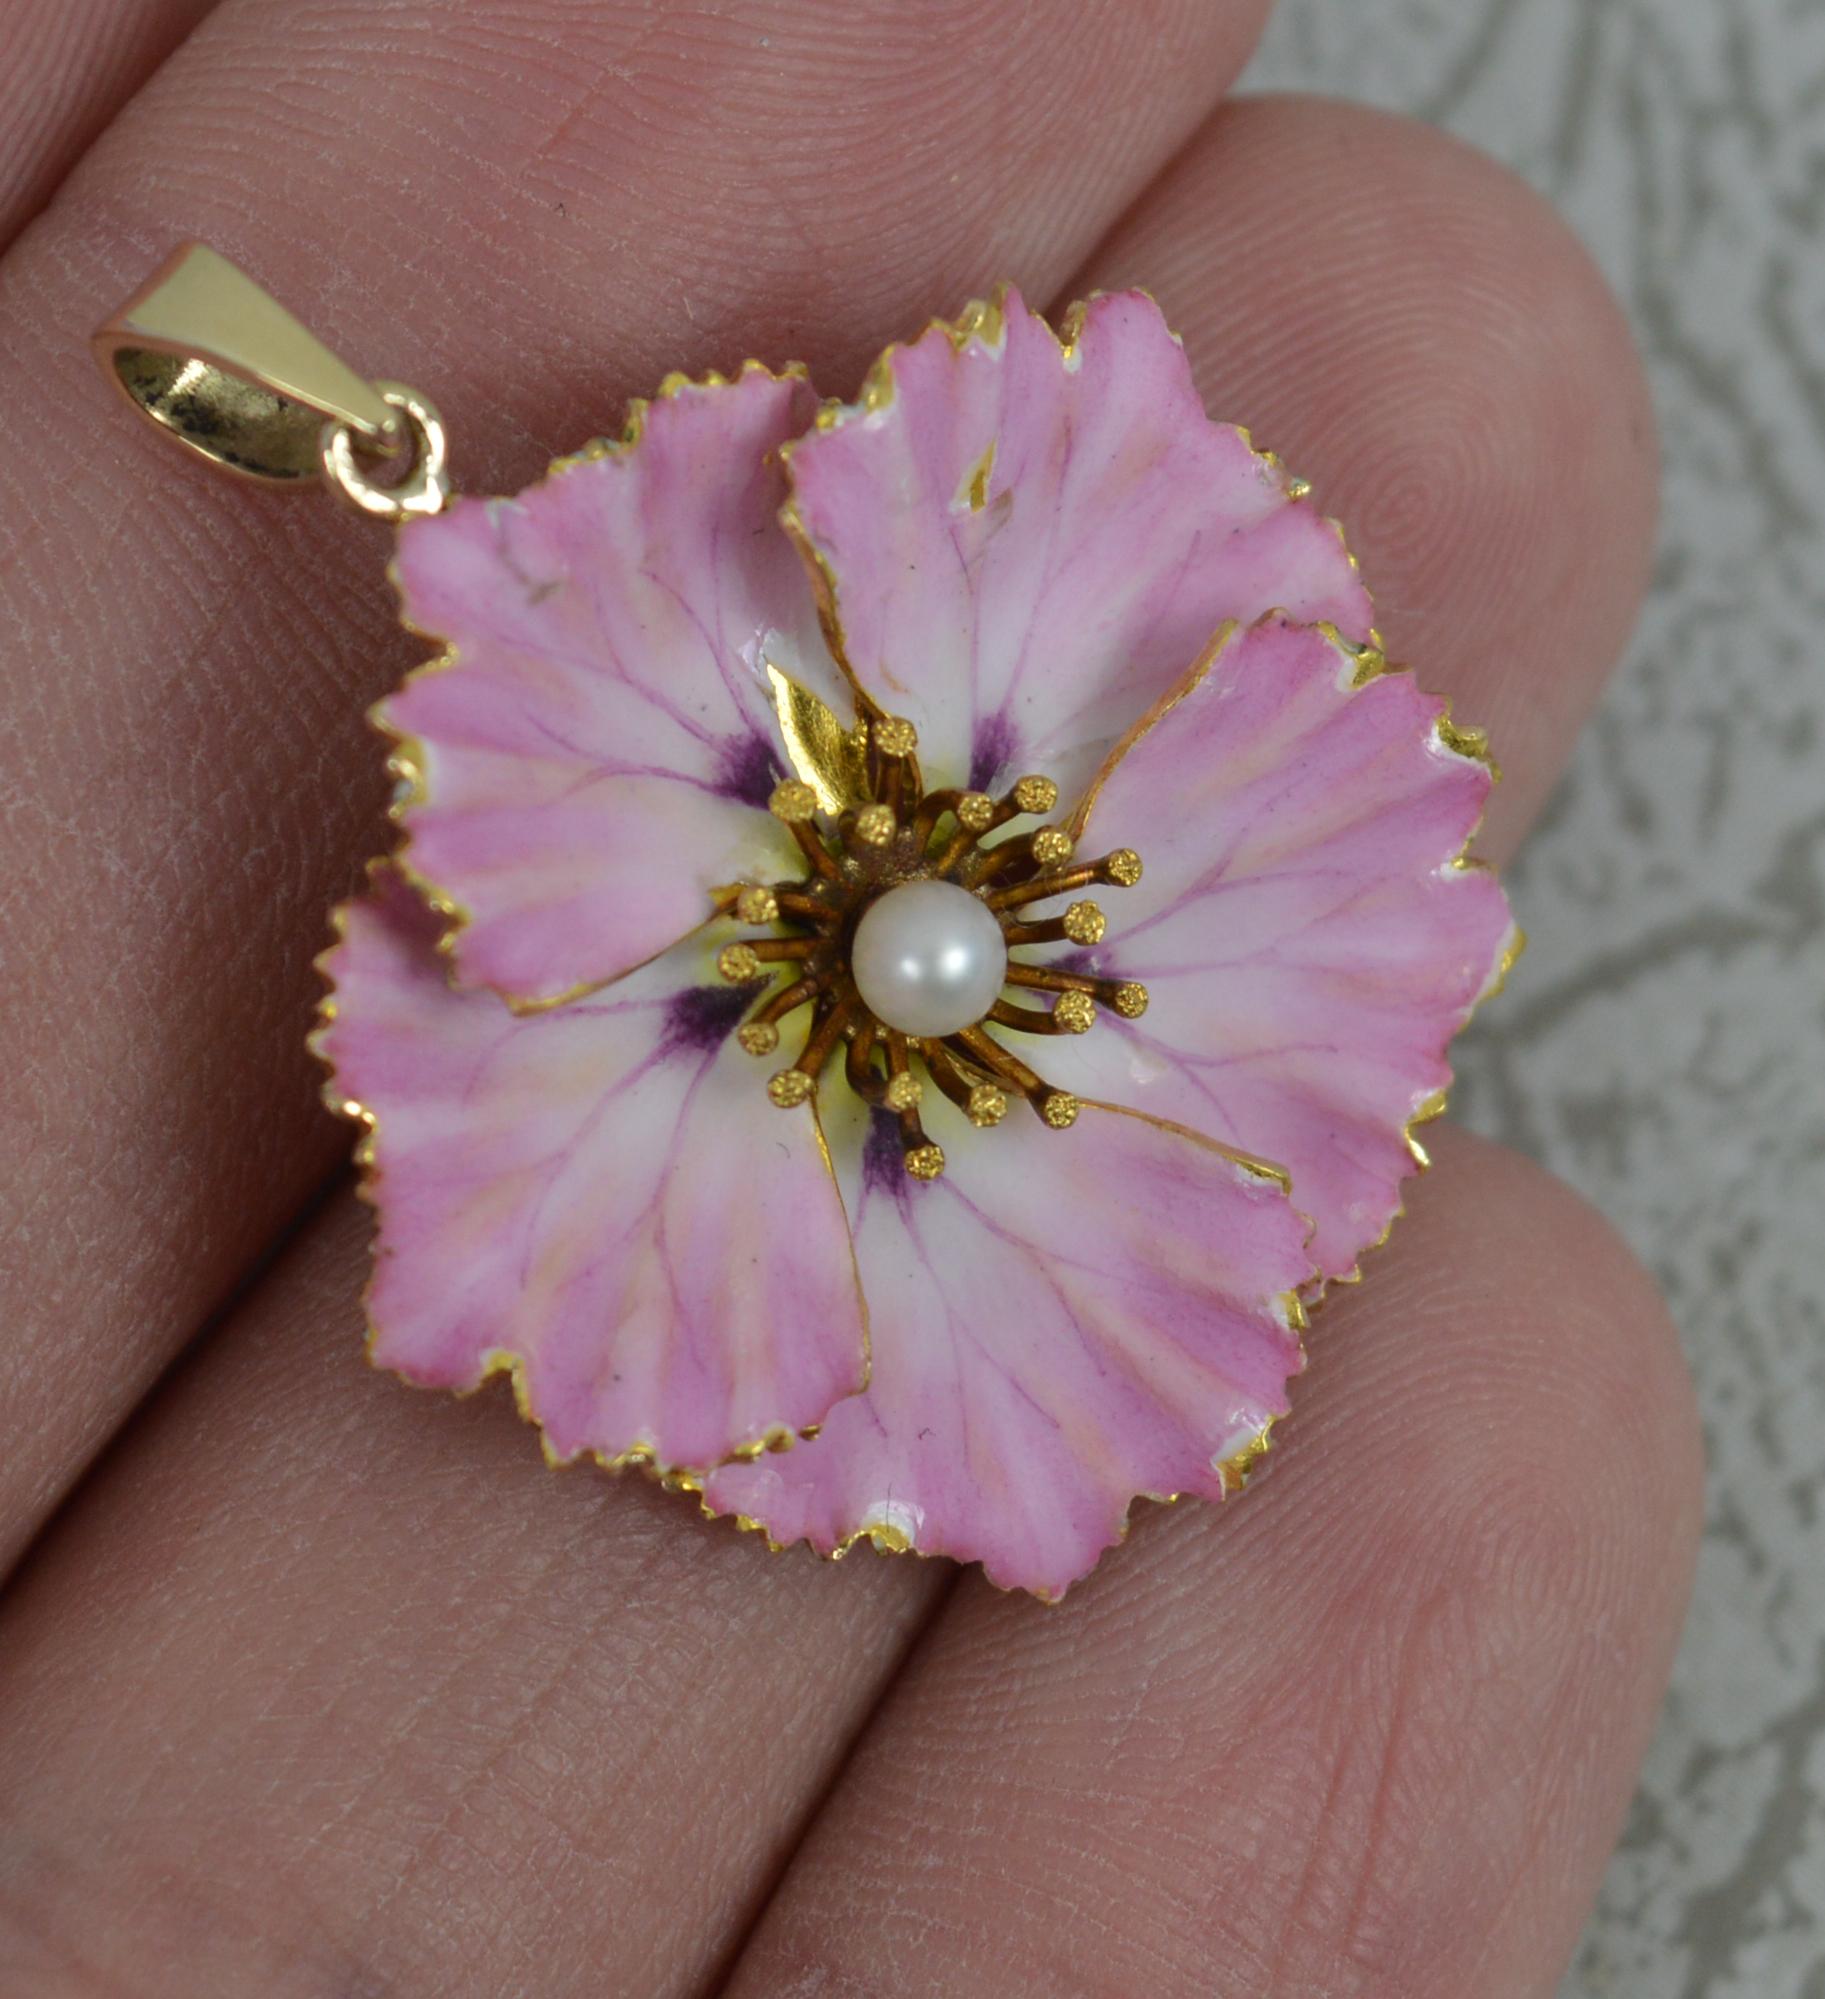 A superb Victorian era flower shape pendant, circa 1880.
Solid 14 carat gold example.
Designed with a pearl to centre and baby pink enamel to the front.

CONDITION ; Good for age. Crisp design. Well set pearl. Some wear and loss to enamelled front.